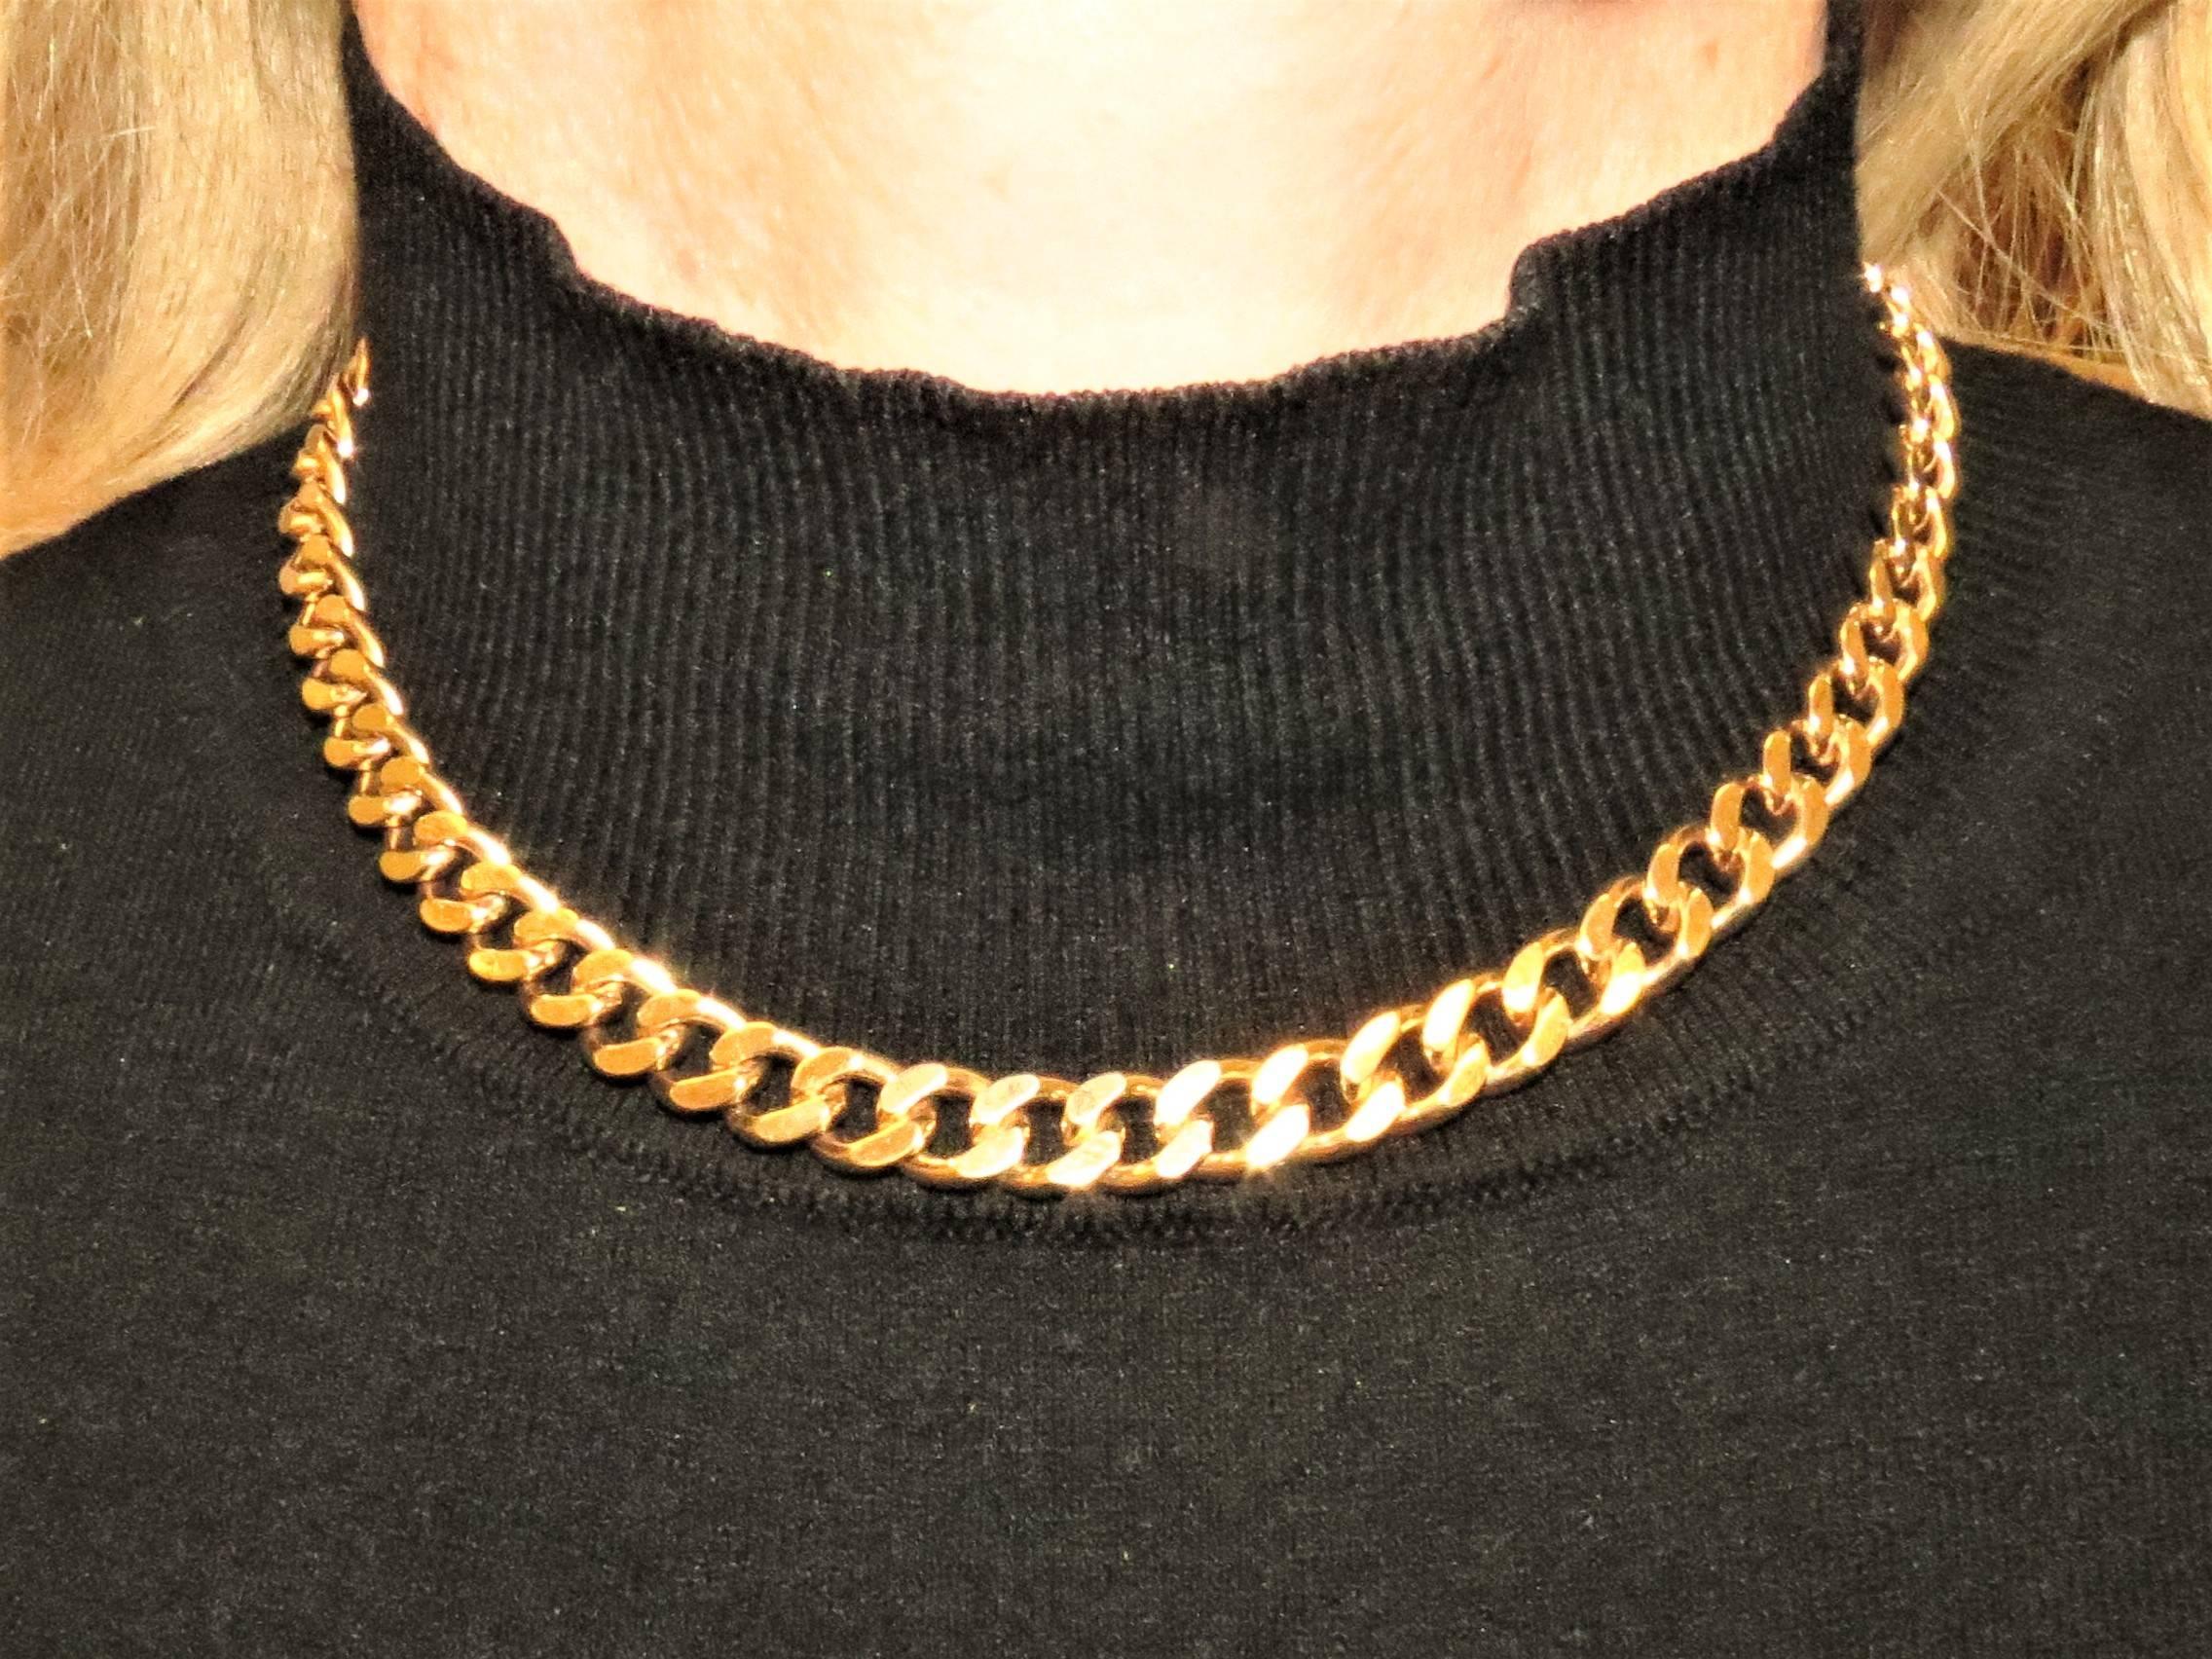 14K yellow gold curb link necklace, 15 inches long and .25 inches wide.